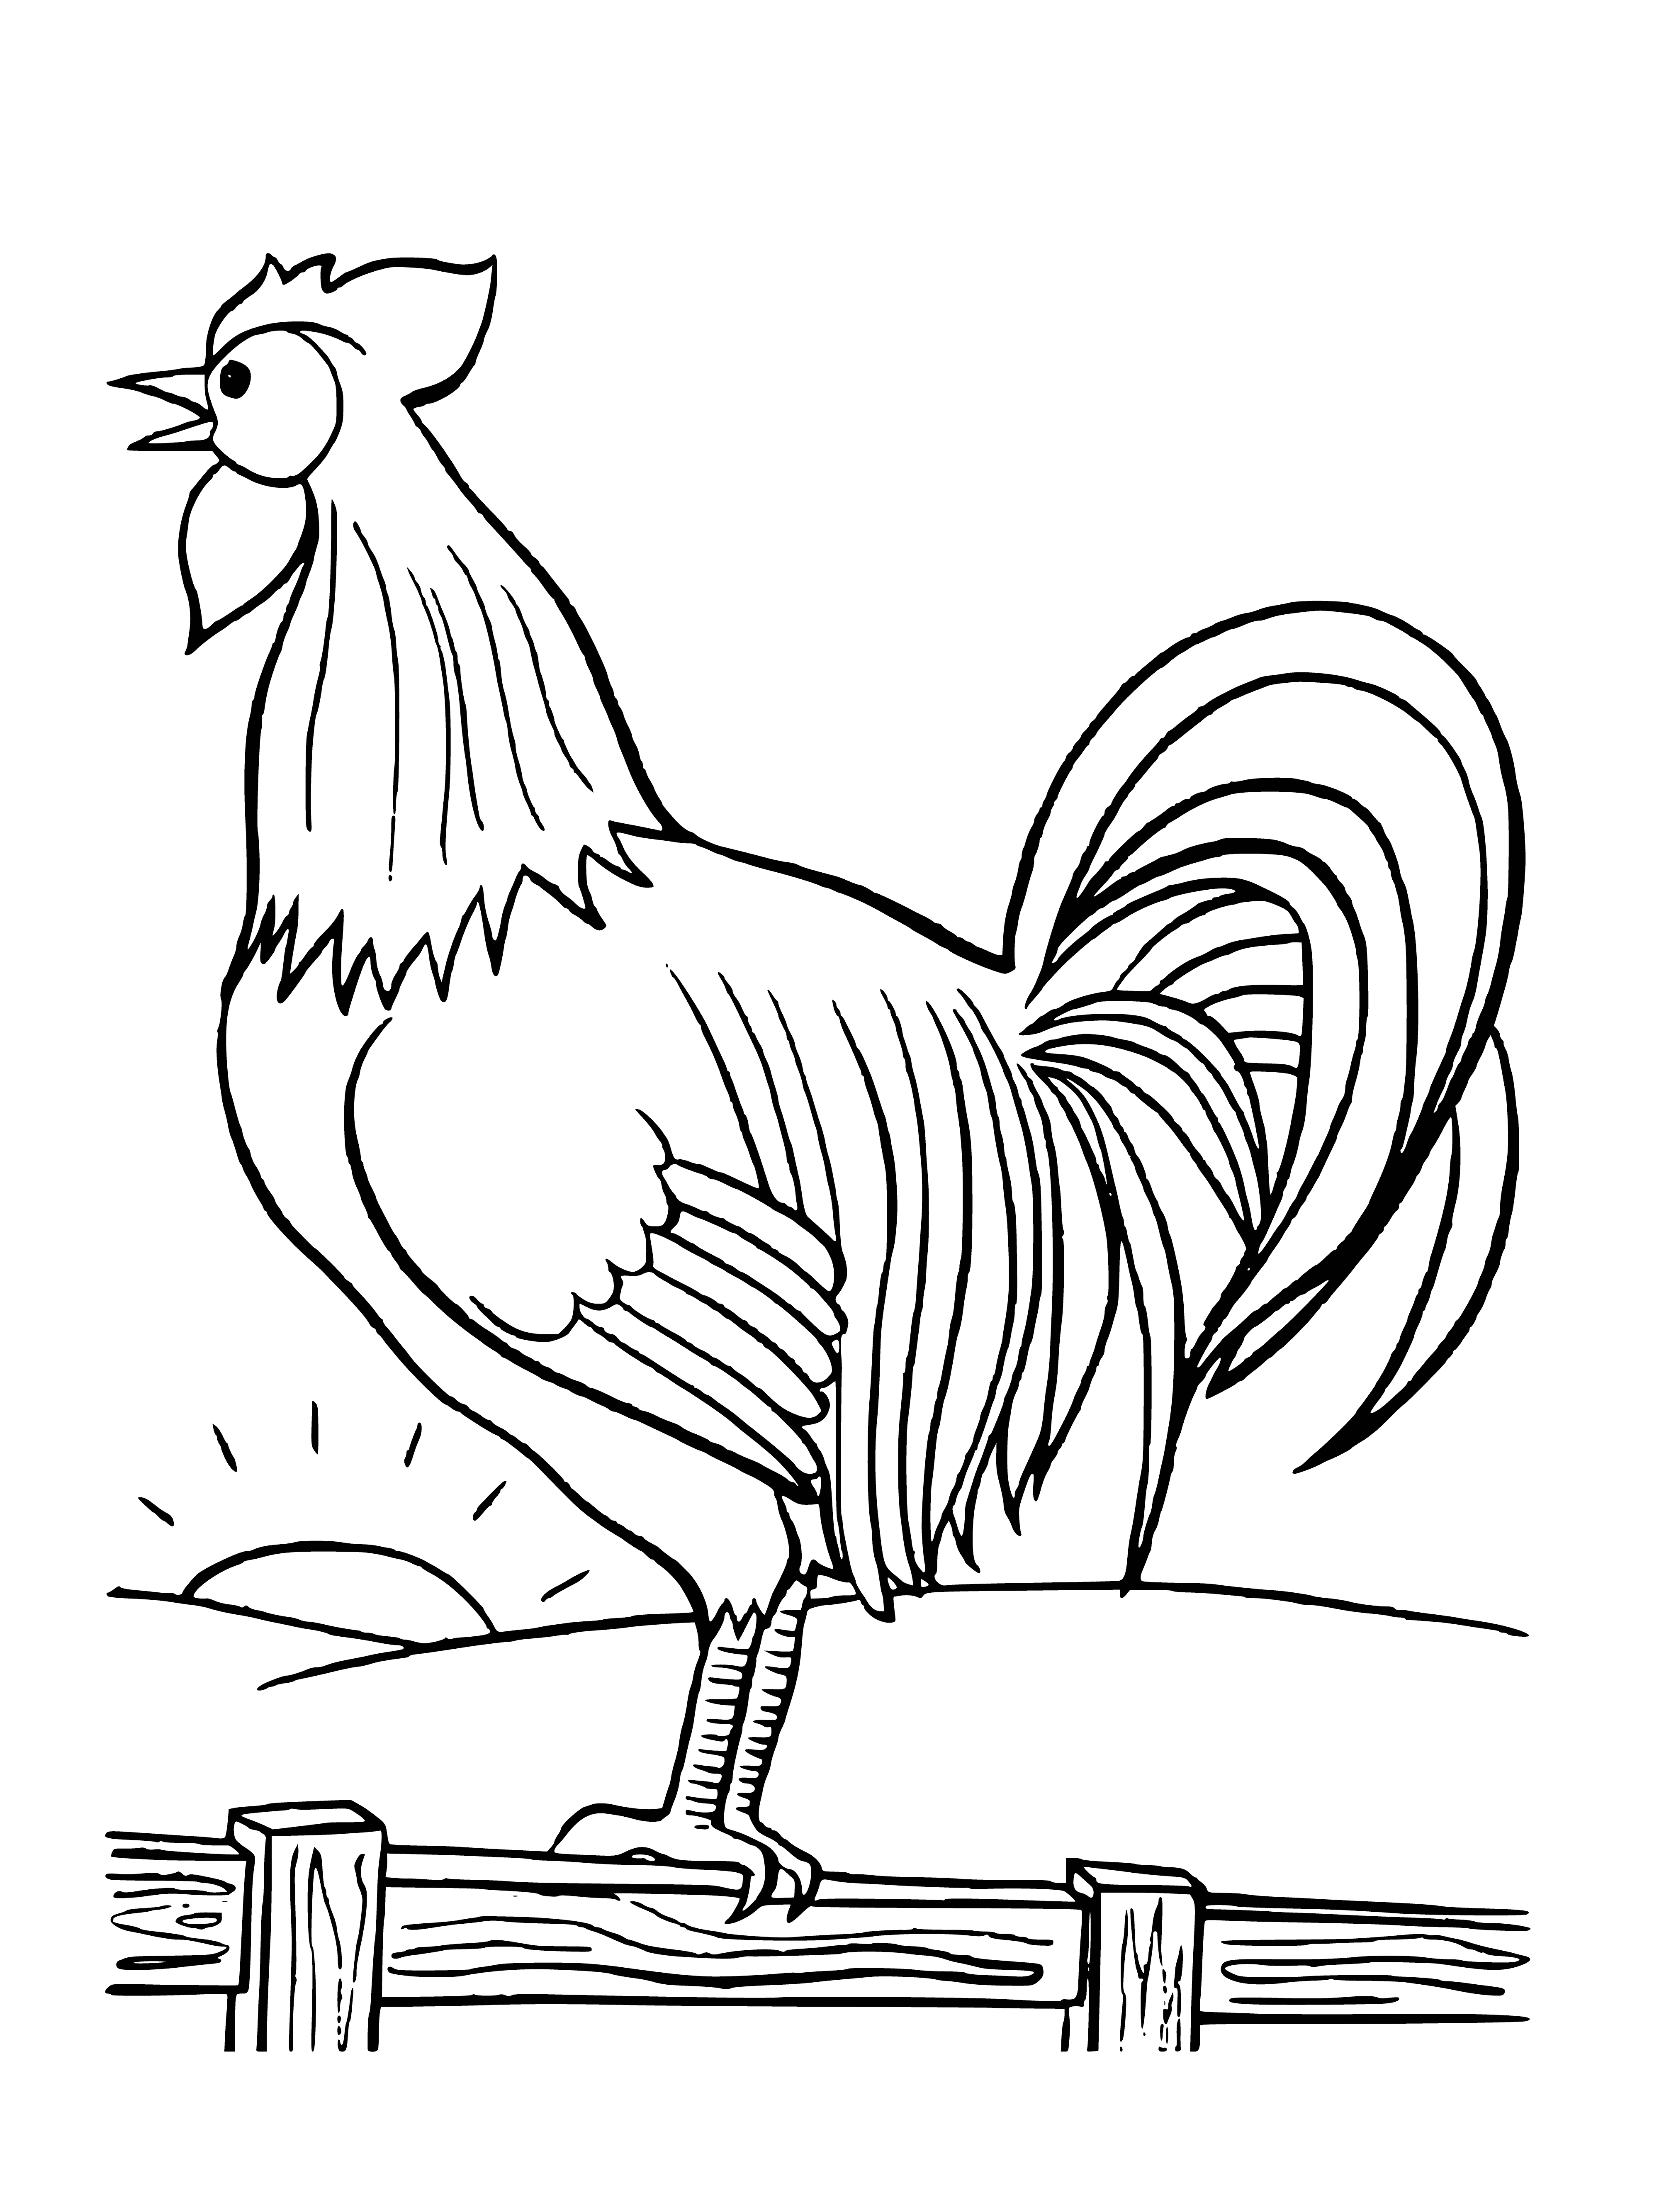 coloring page: A rooster crows atop a fence post in a misty barnyard at sunrise.